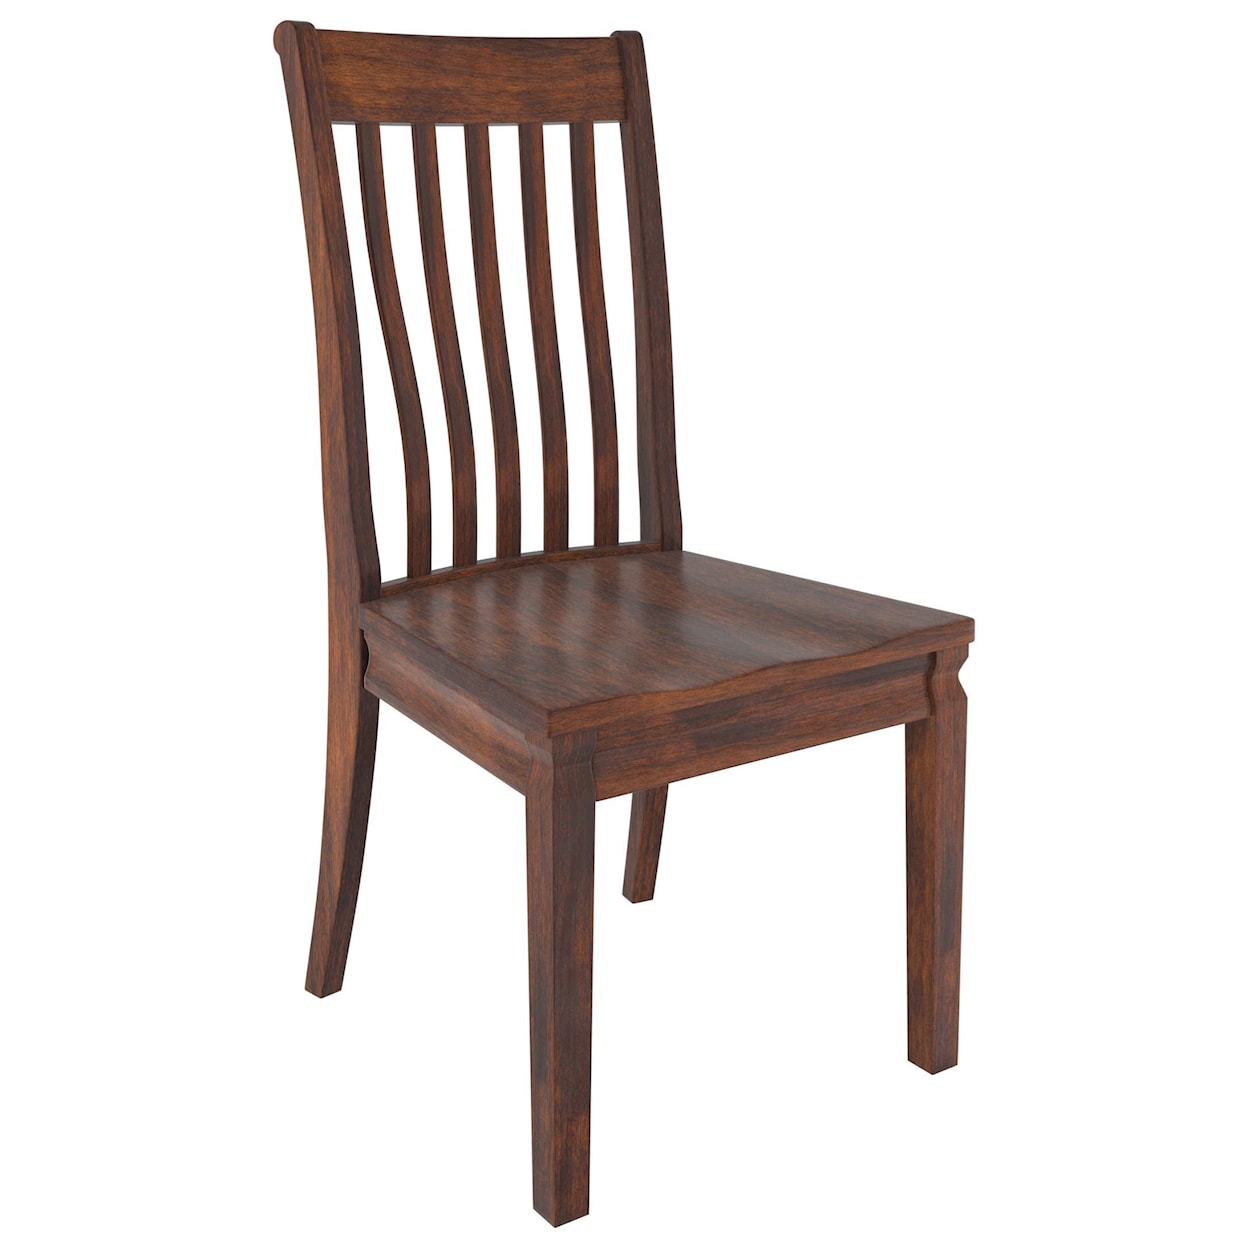 Country Comfort Woodworking Bennex Side Chair